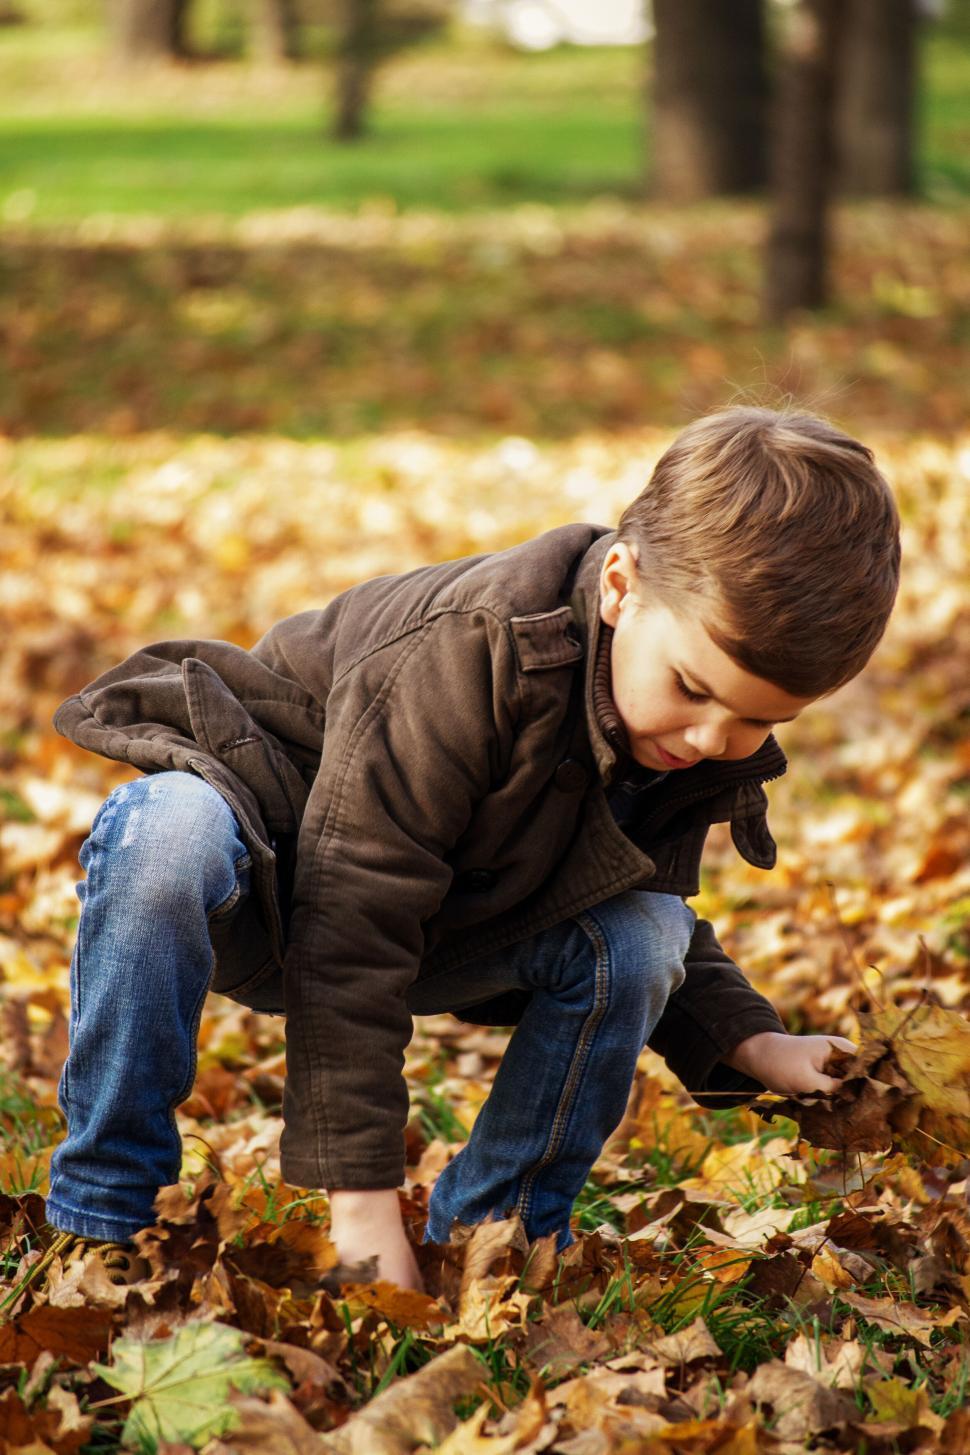 Free Image of Child playing with autumn leaves in park 